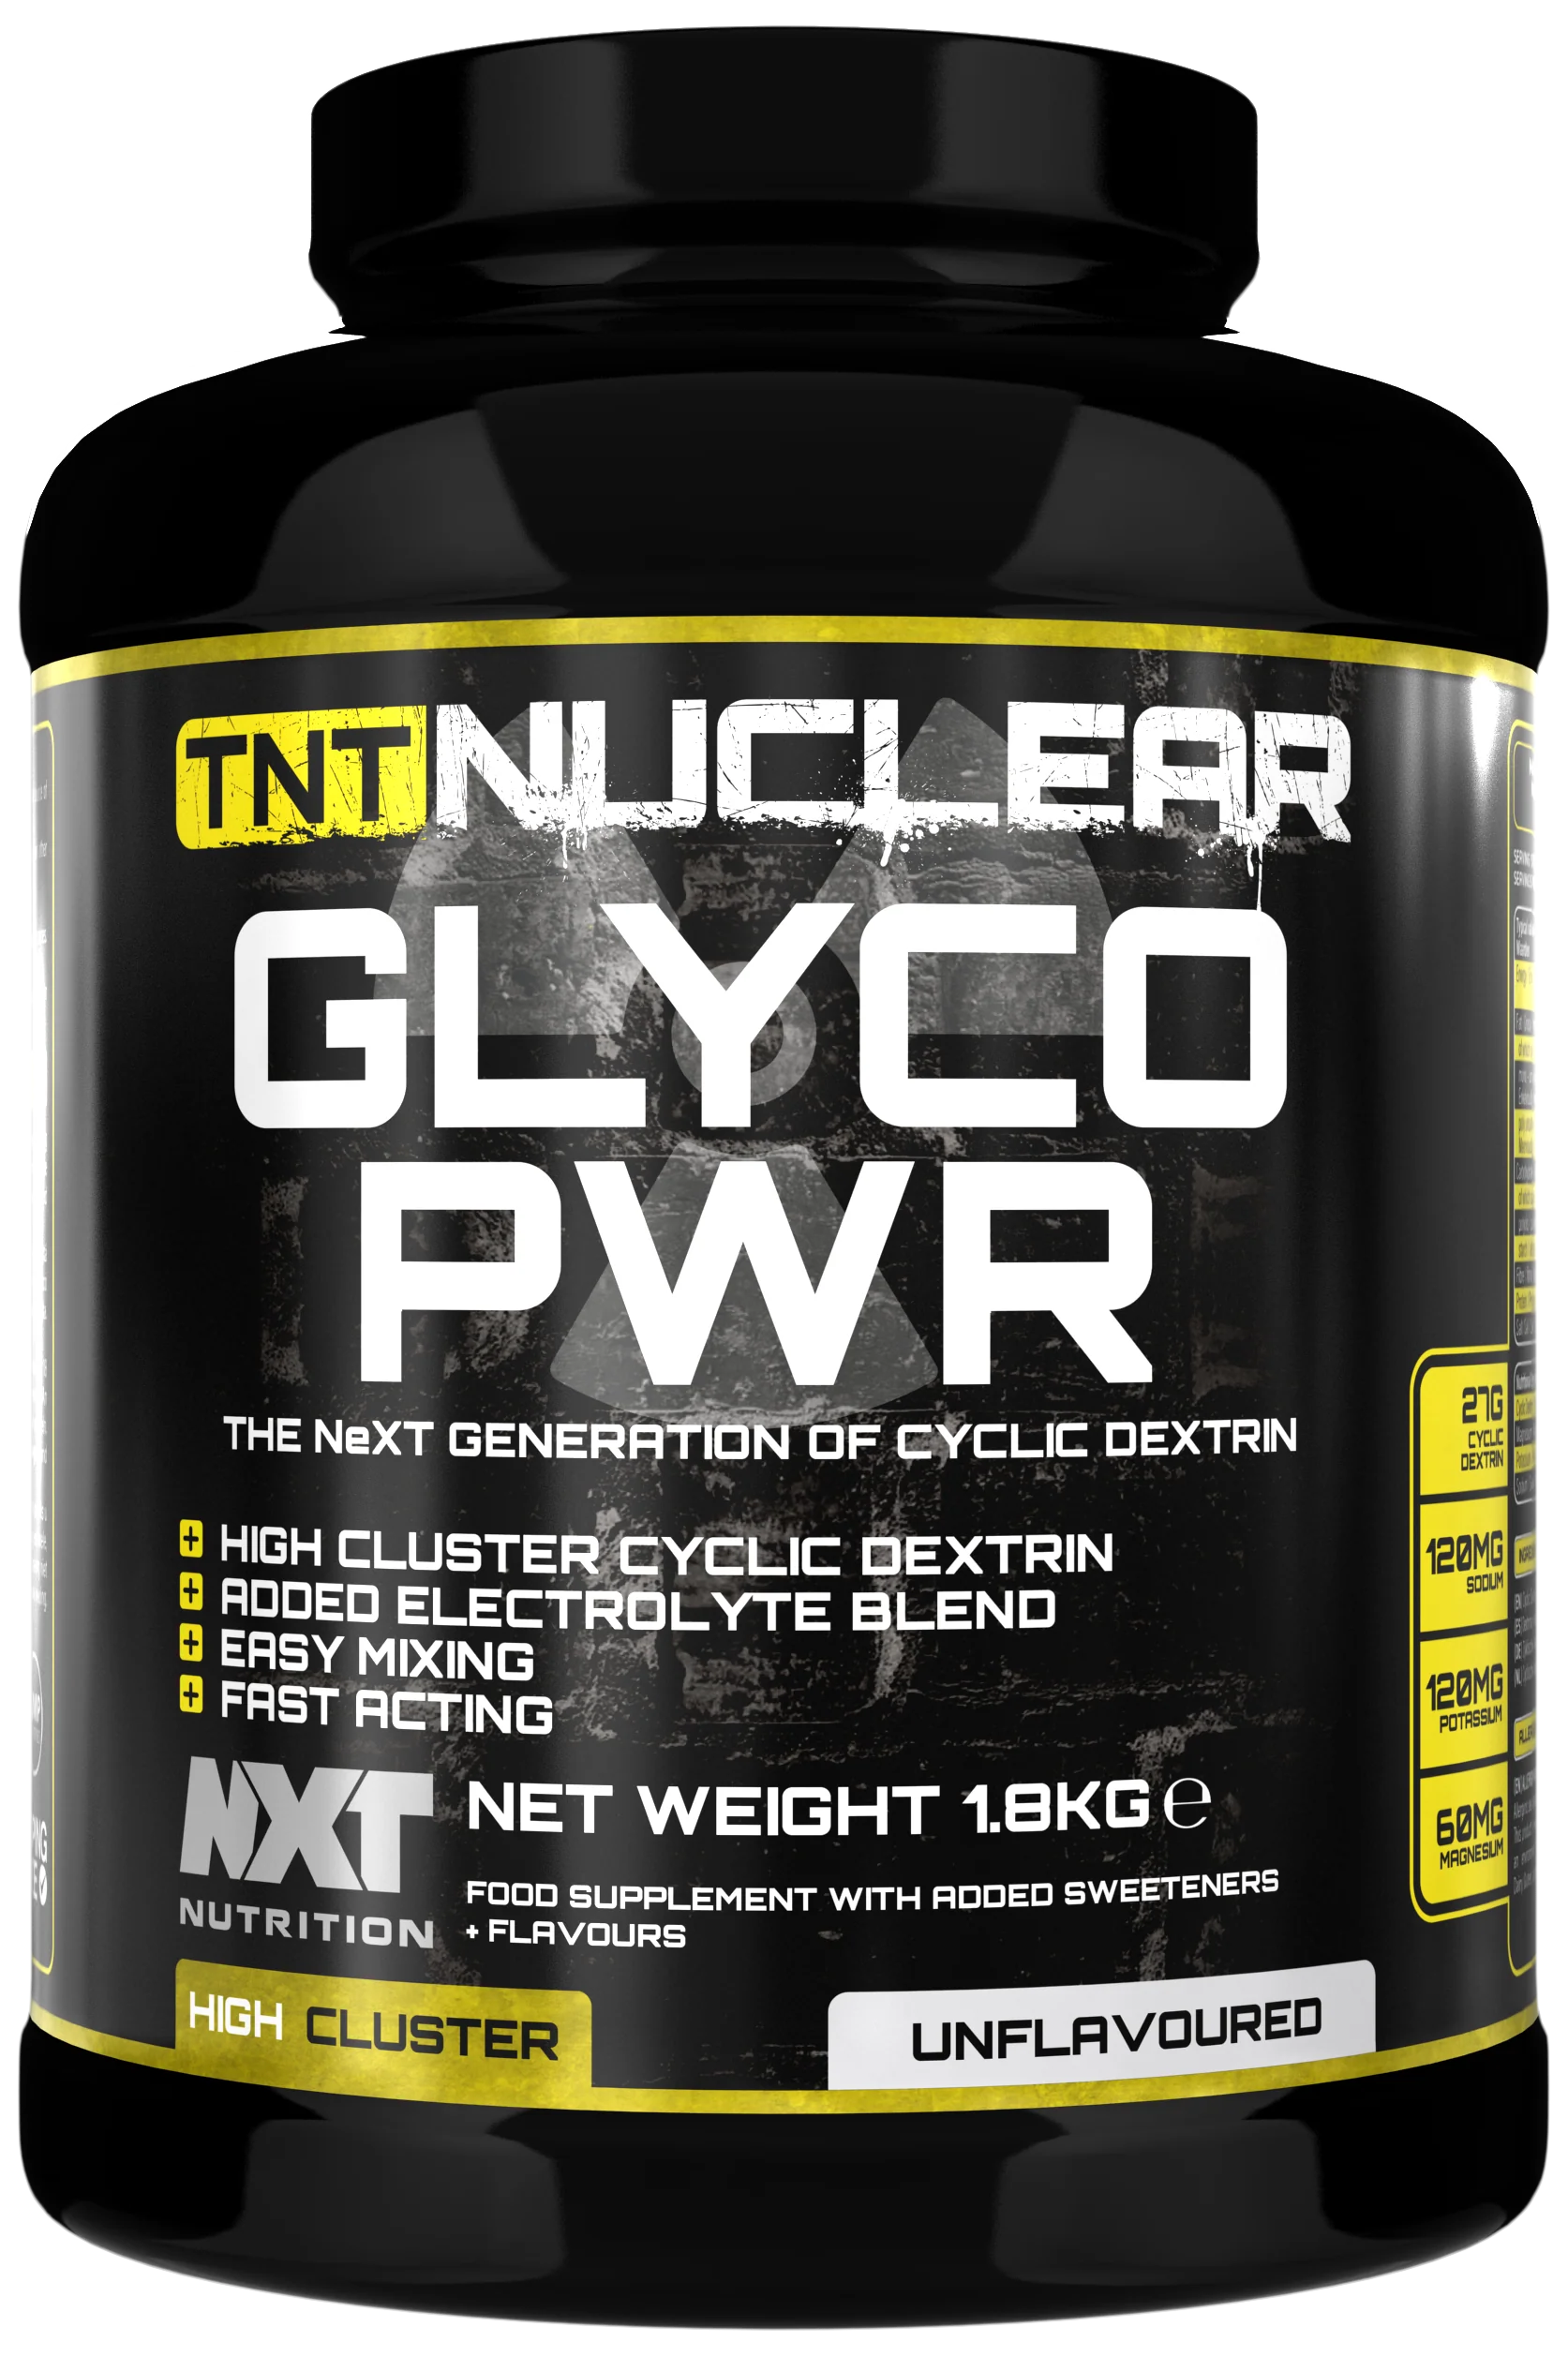 NXT TNT NUCLEAR GLYCO POWER - 1.8KG DOSE